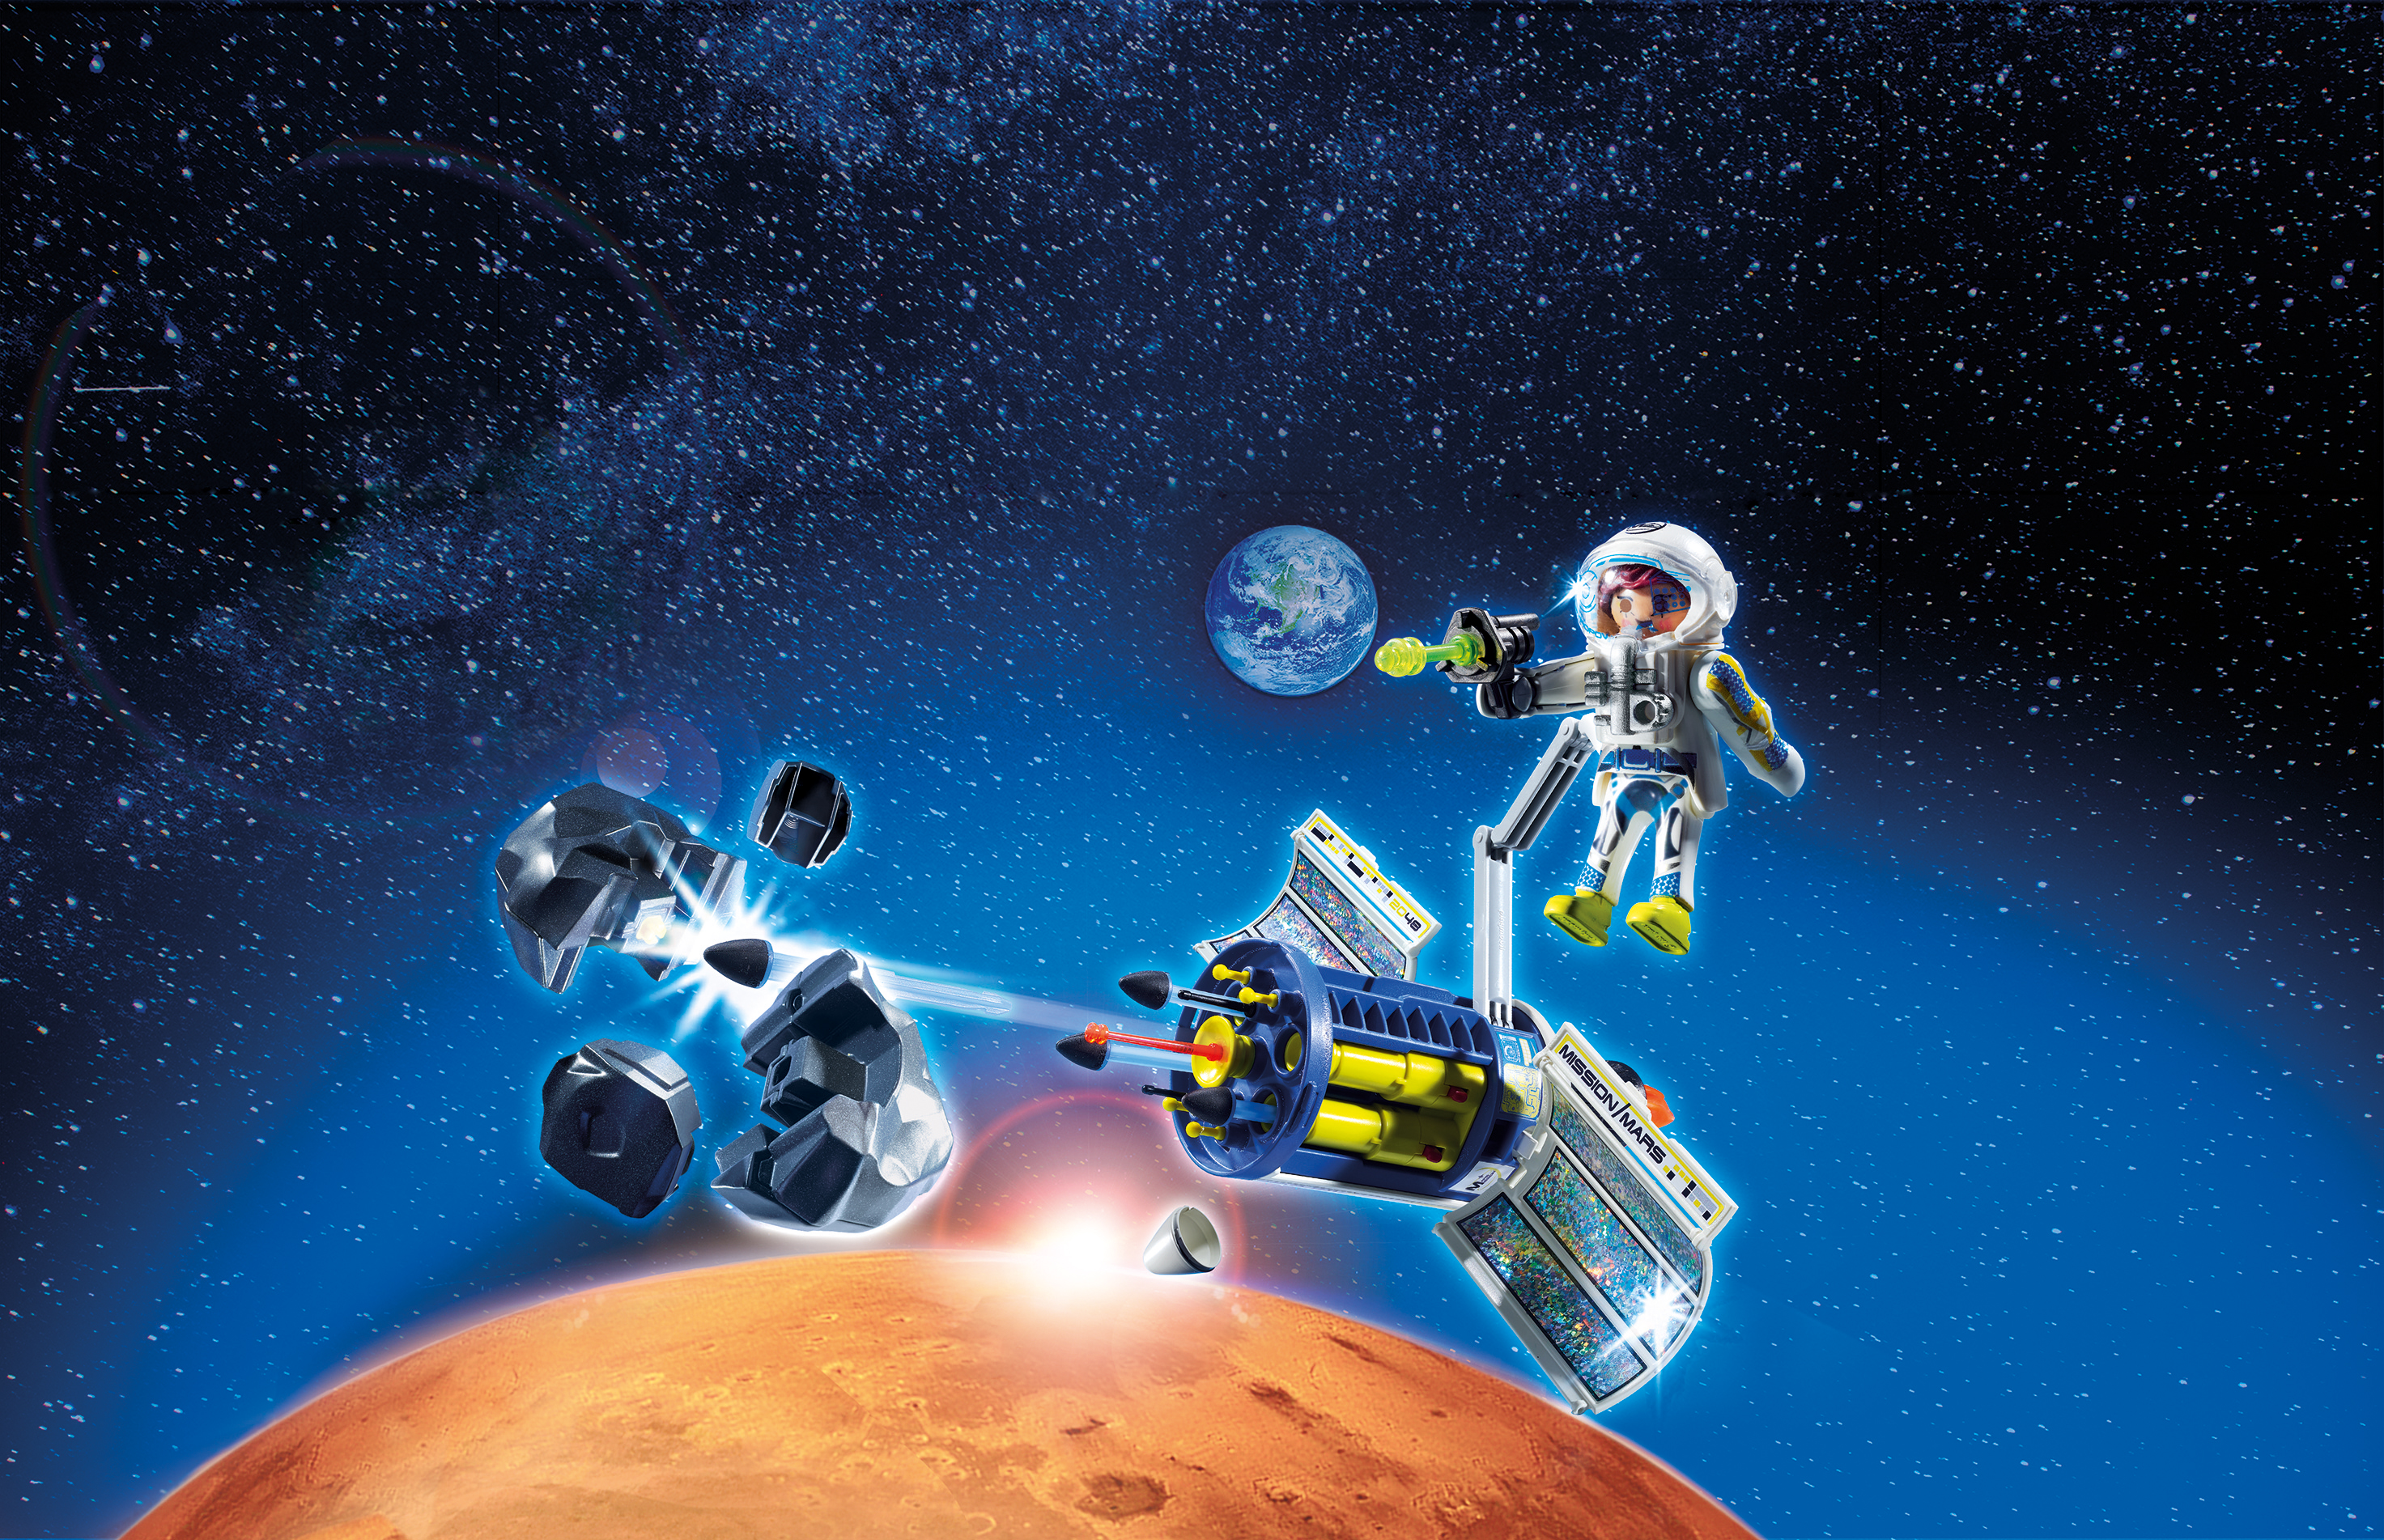 PLAYMOBIL 'Mars Mission' Giveaway: Enter to Win 6 Red Planet Playsets